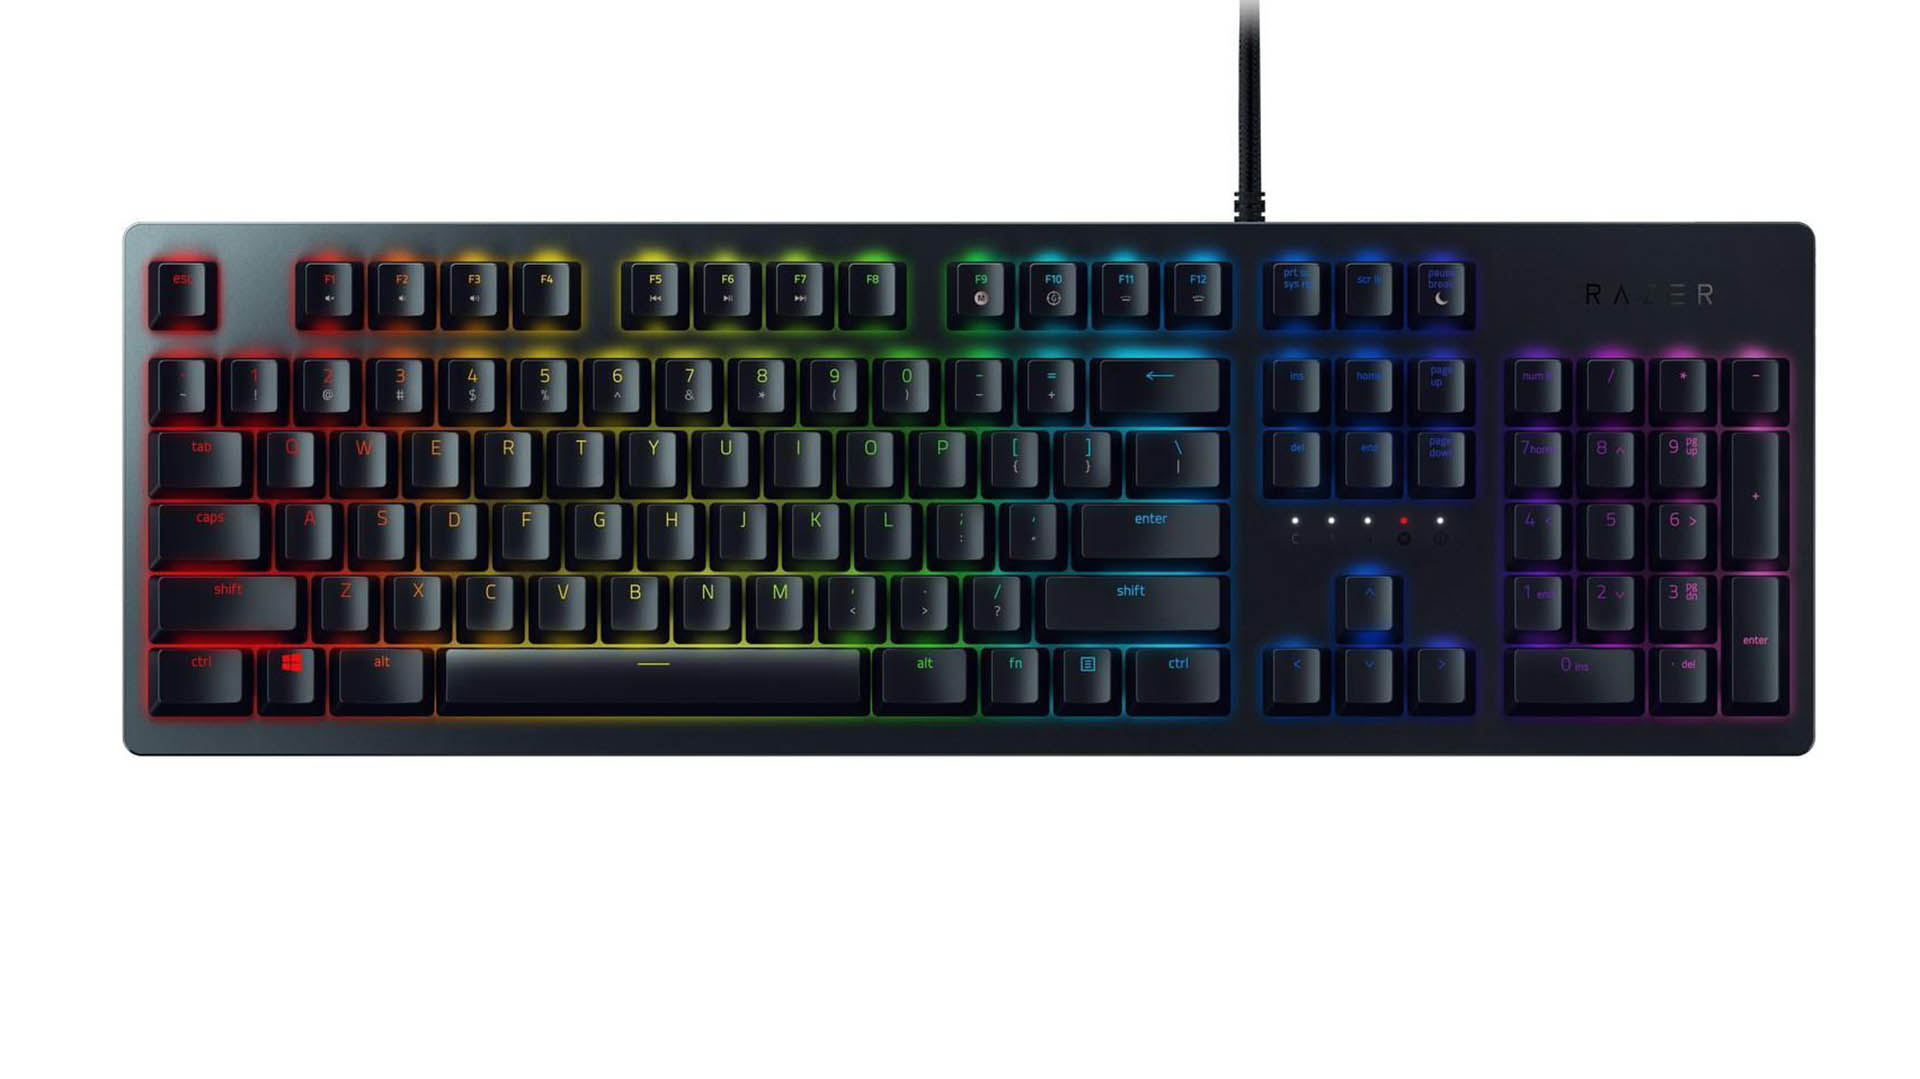 Razer's Huntsman gaming keyboard operates at the speed of light, and is now only £80